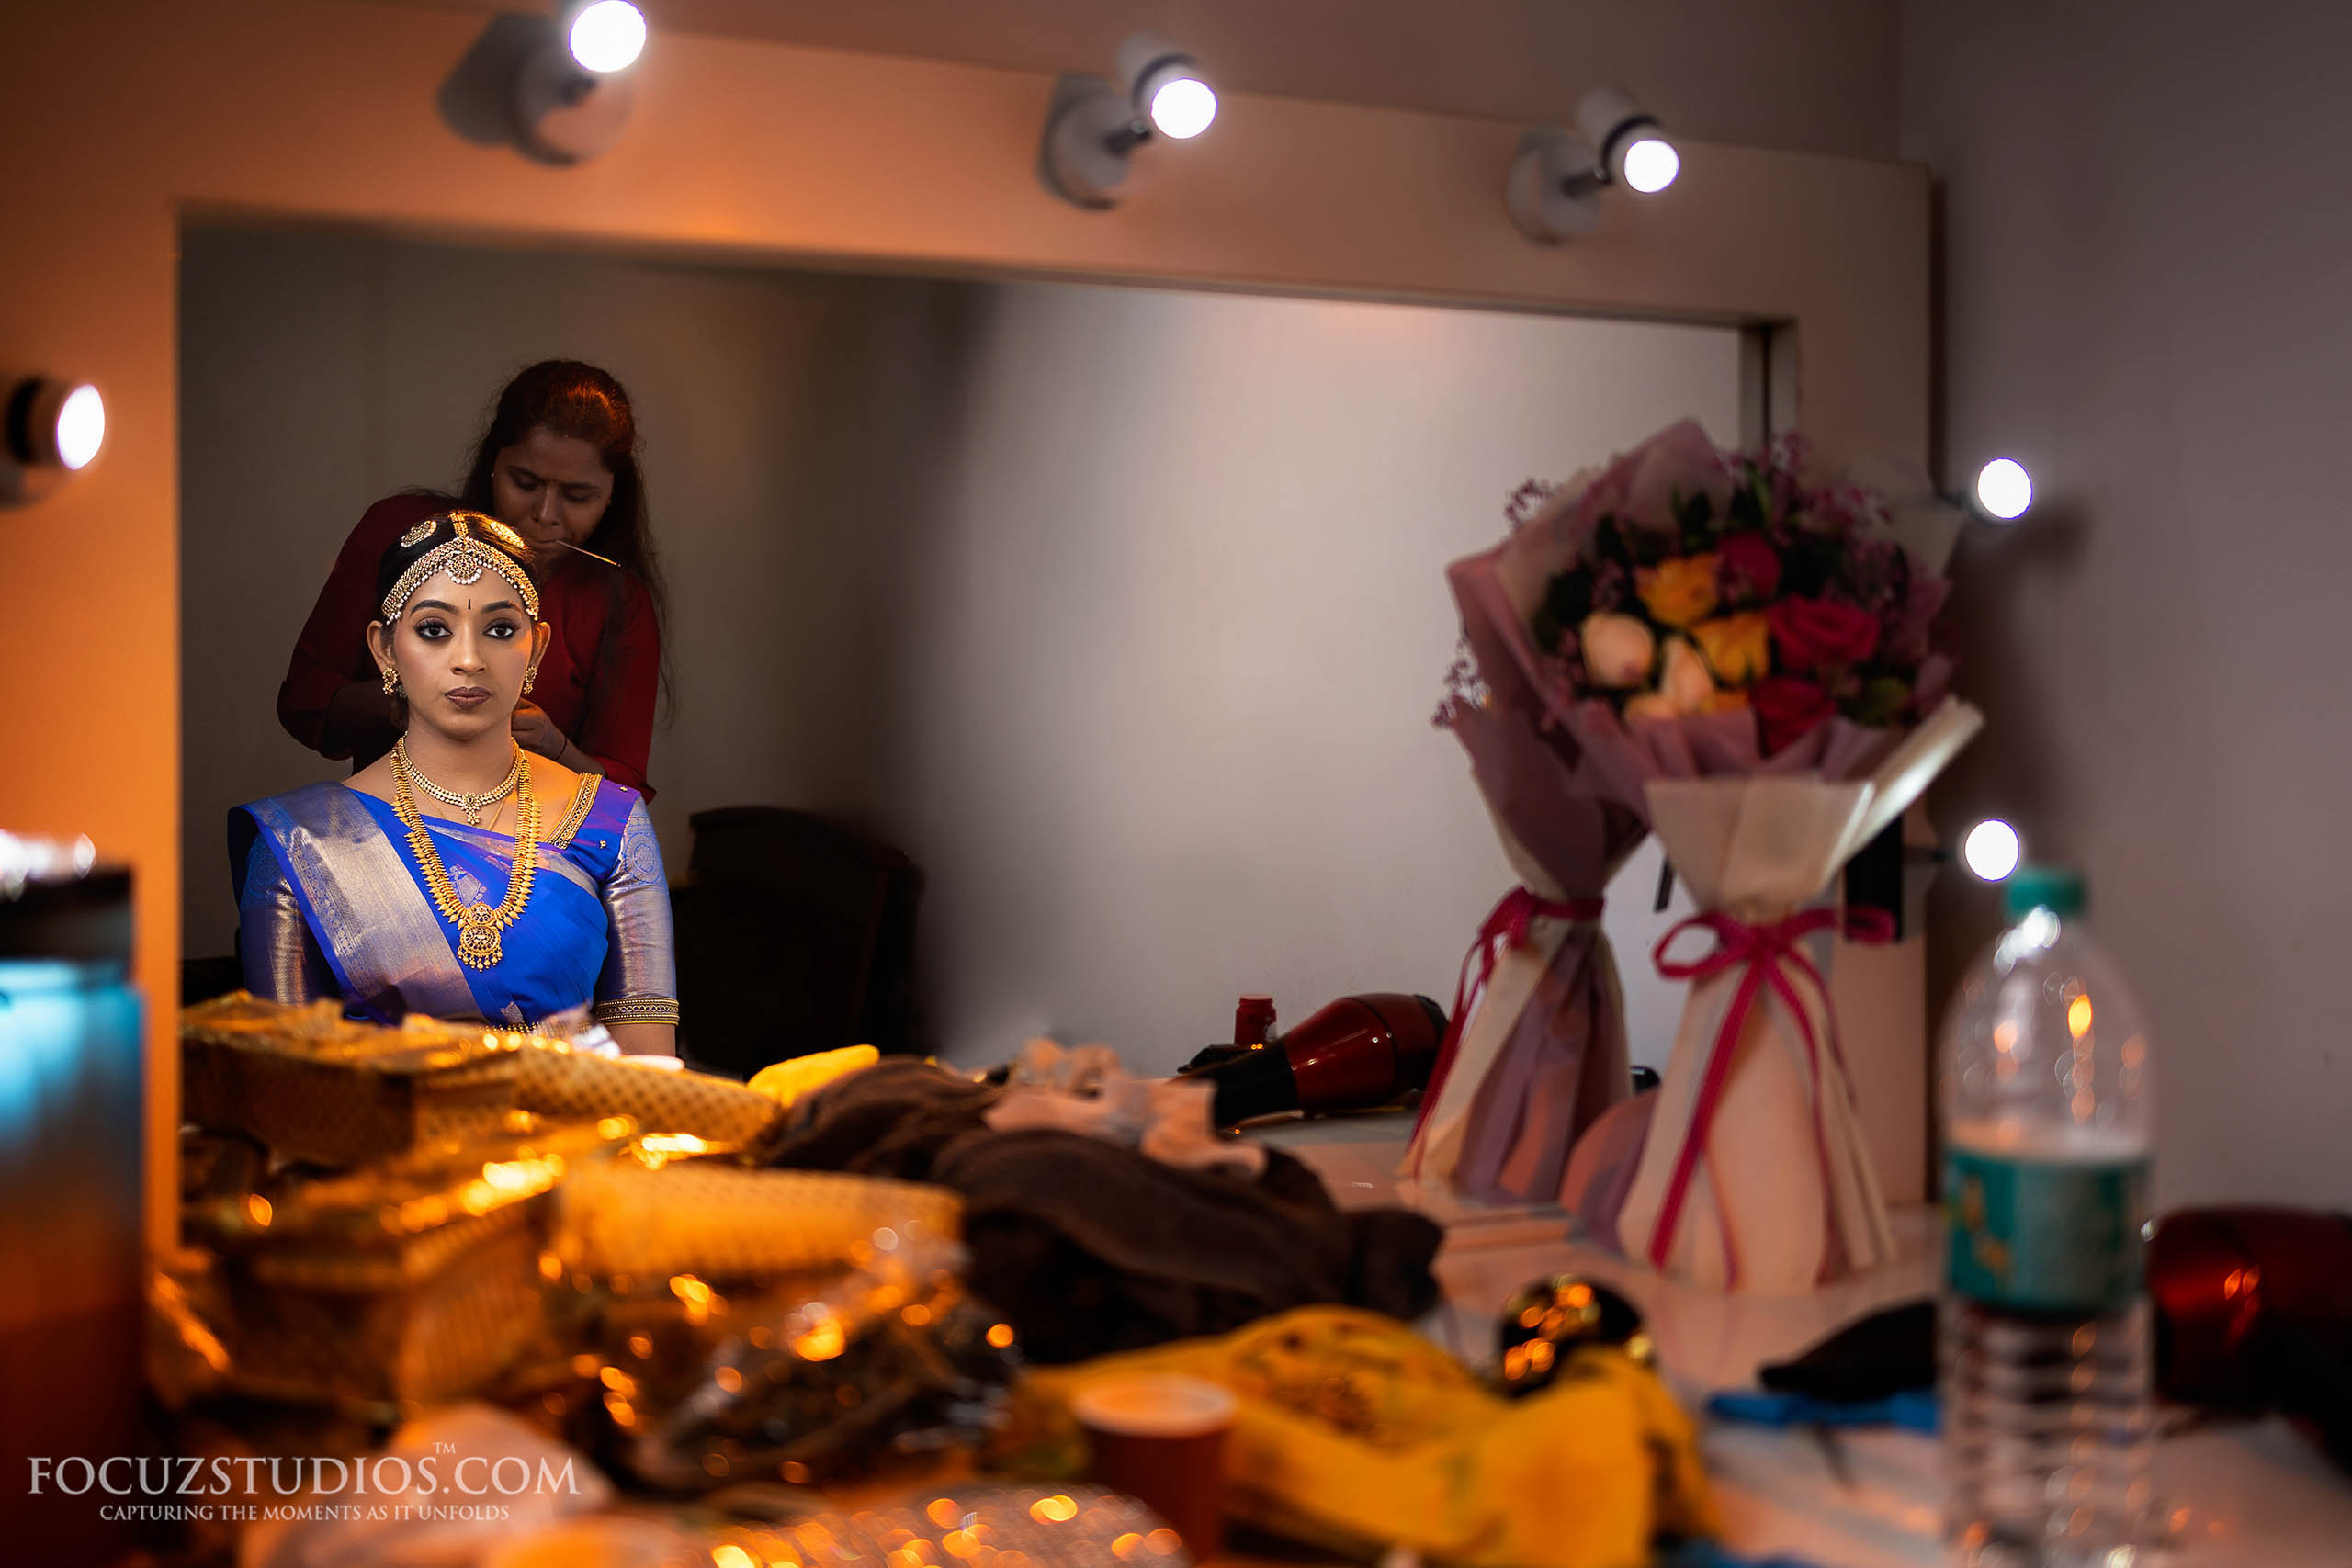 south-indian-bride-getting-ready-candid-wedding-photography-15